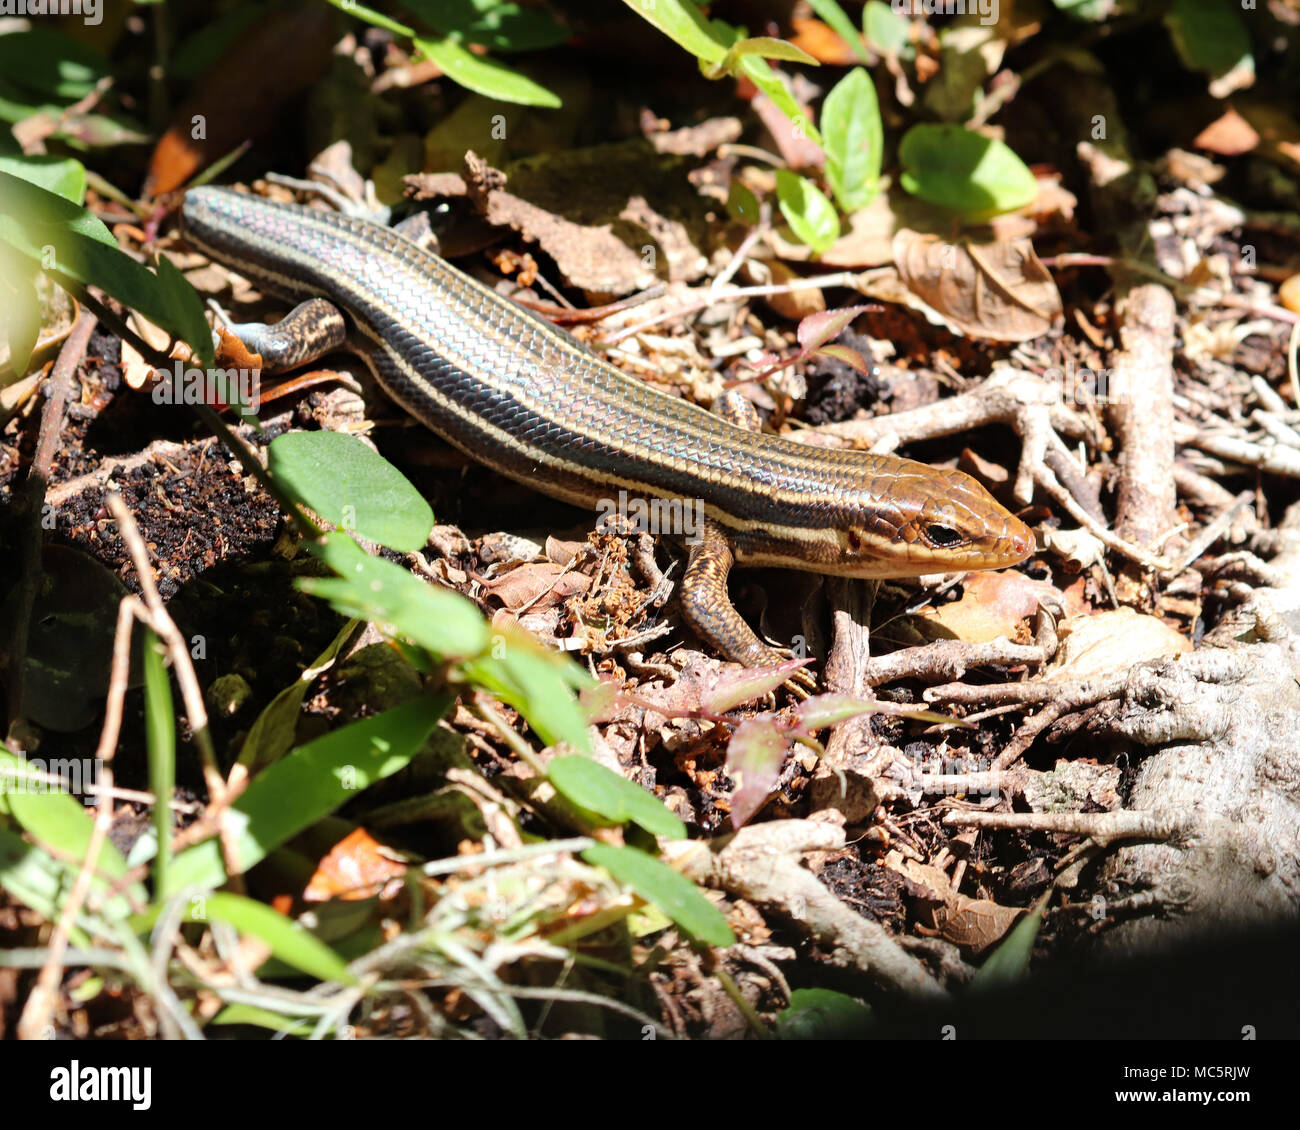 Broad-headed skink with long striped body on wooded ground Stock Photo